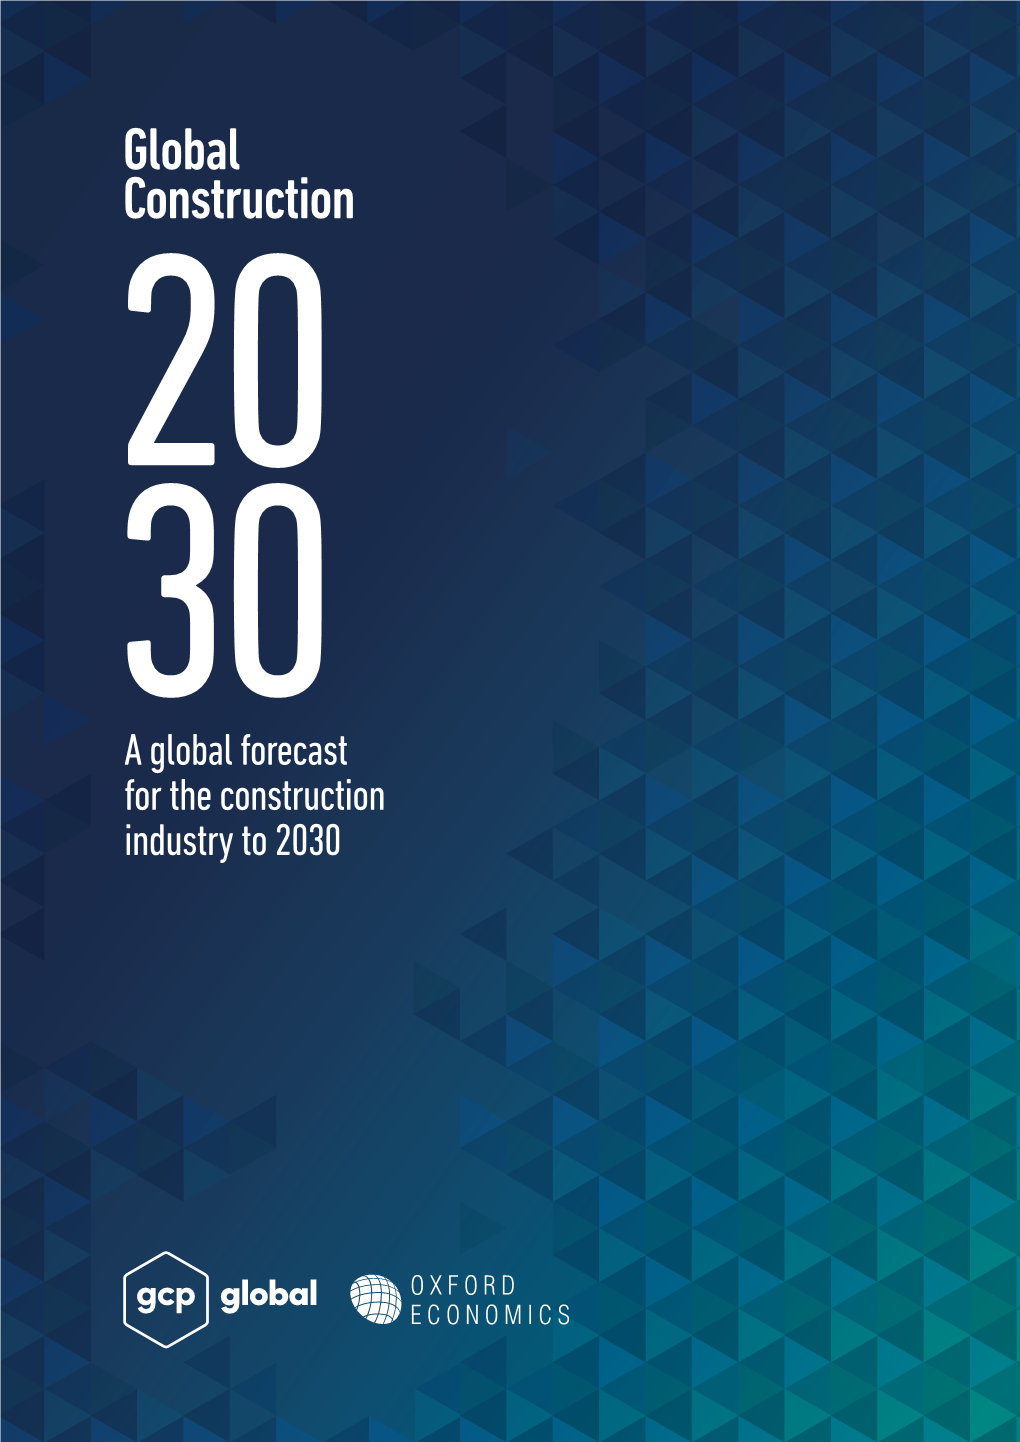 Global Construction 2030 Is the Definitive Overview Of